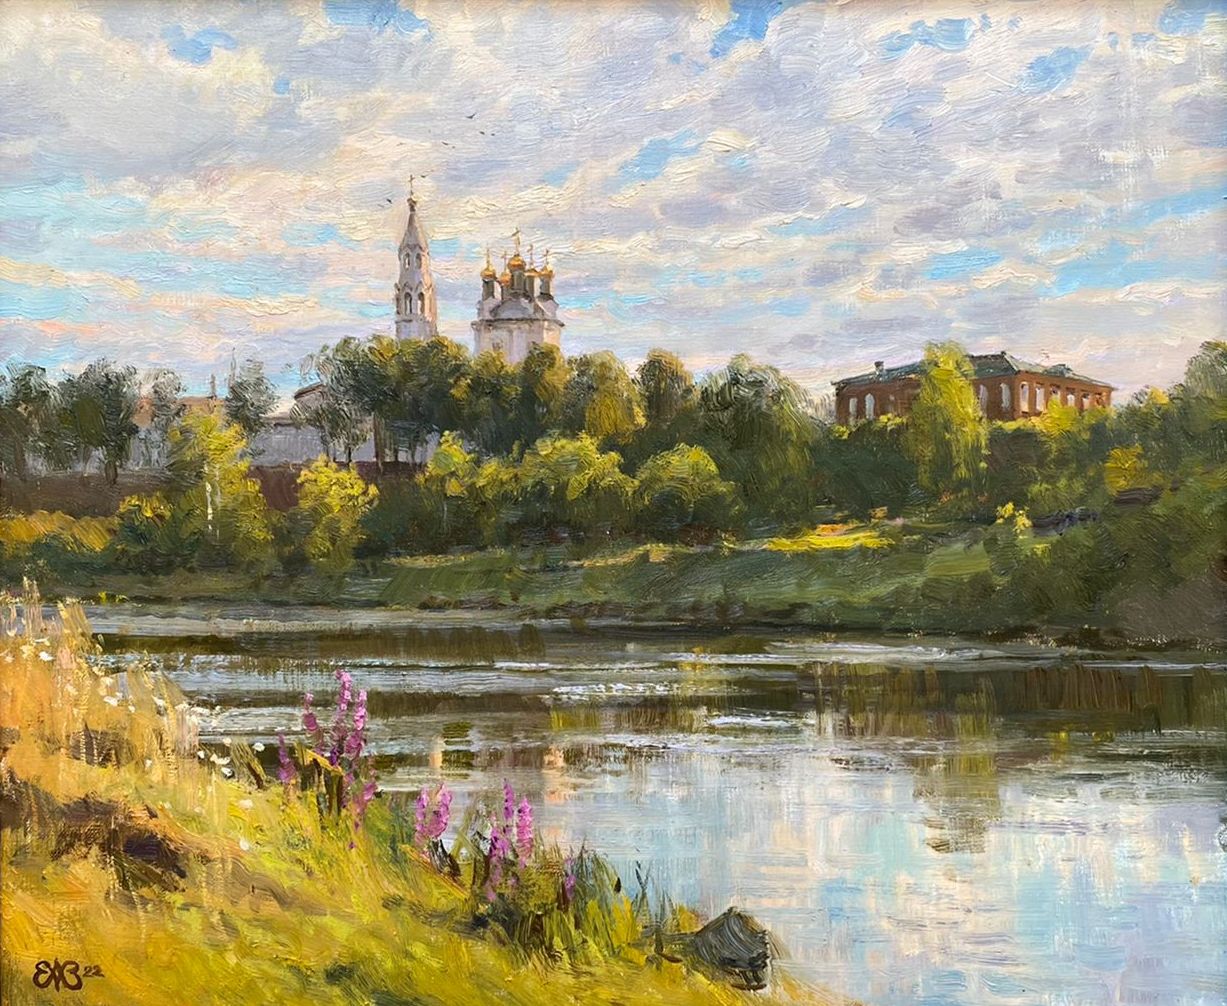 August - 1, Alexey Efremov, Buy the painting Oil